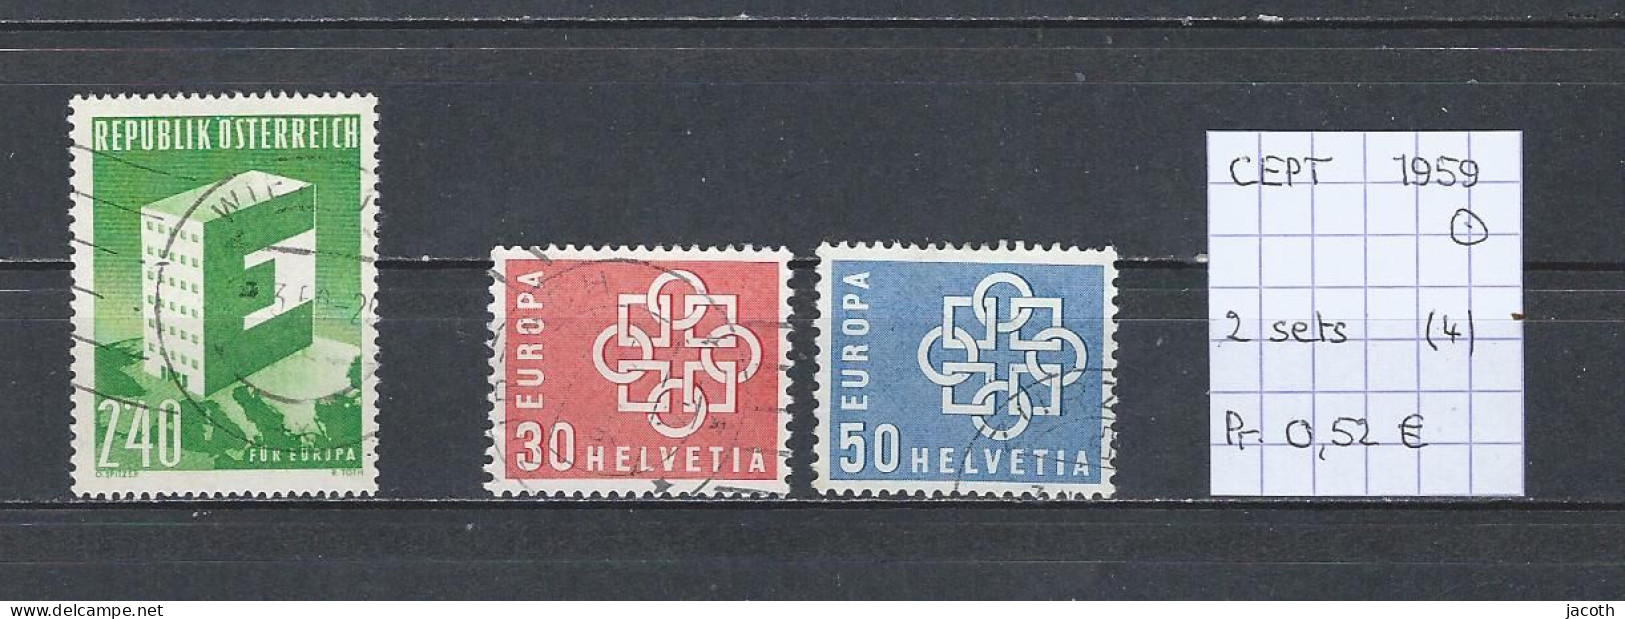 (TJ) Europa CEPT 1959 - 2 Sets (gest./obl./used) - 1959